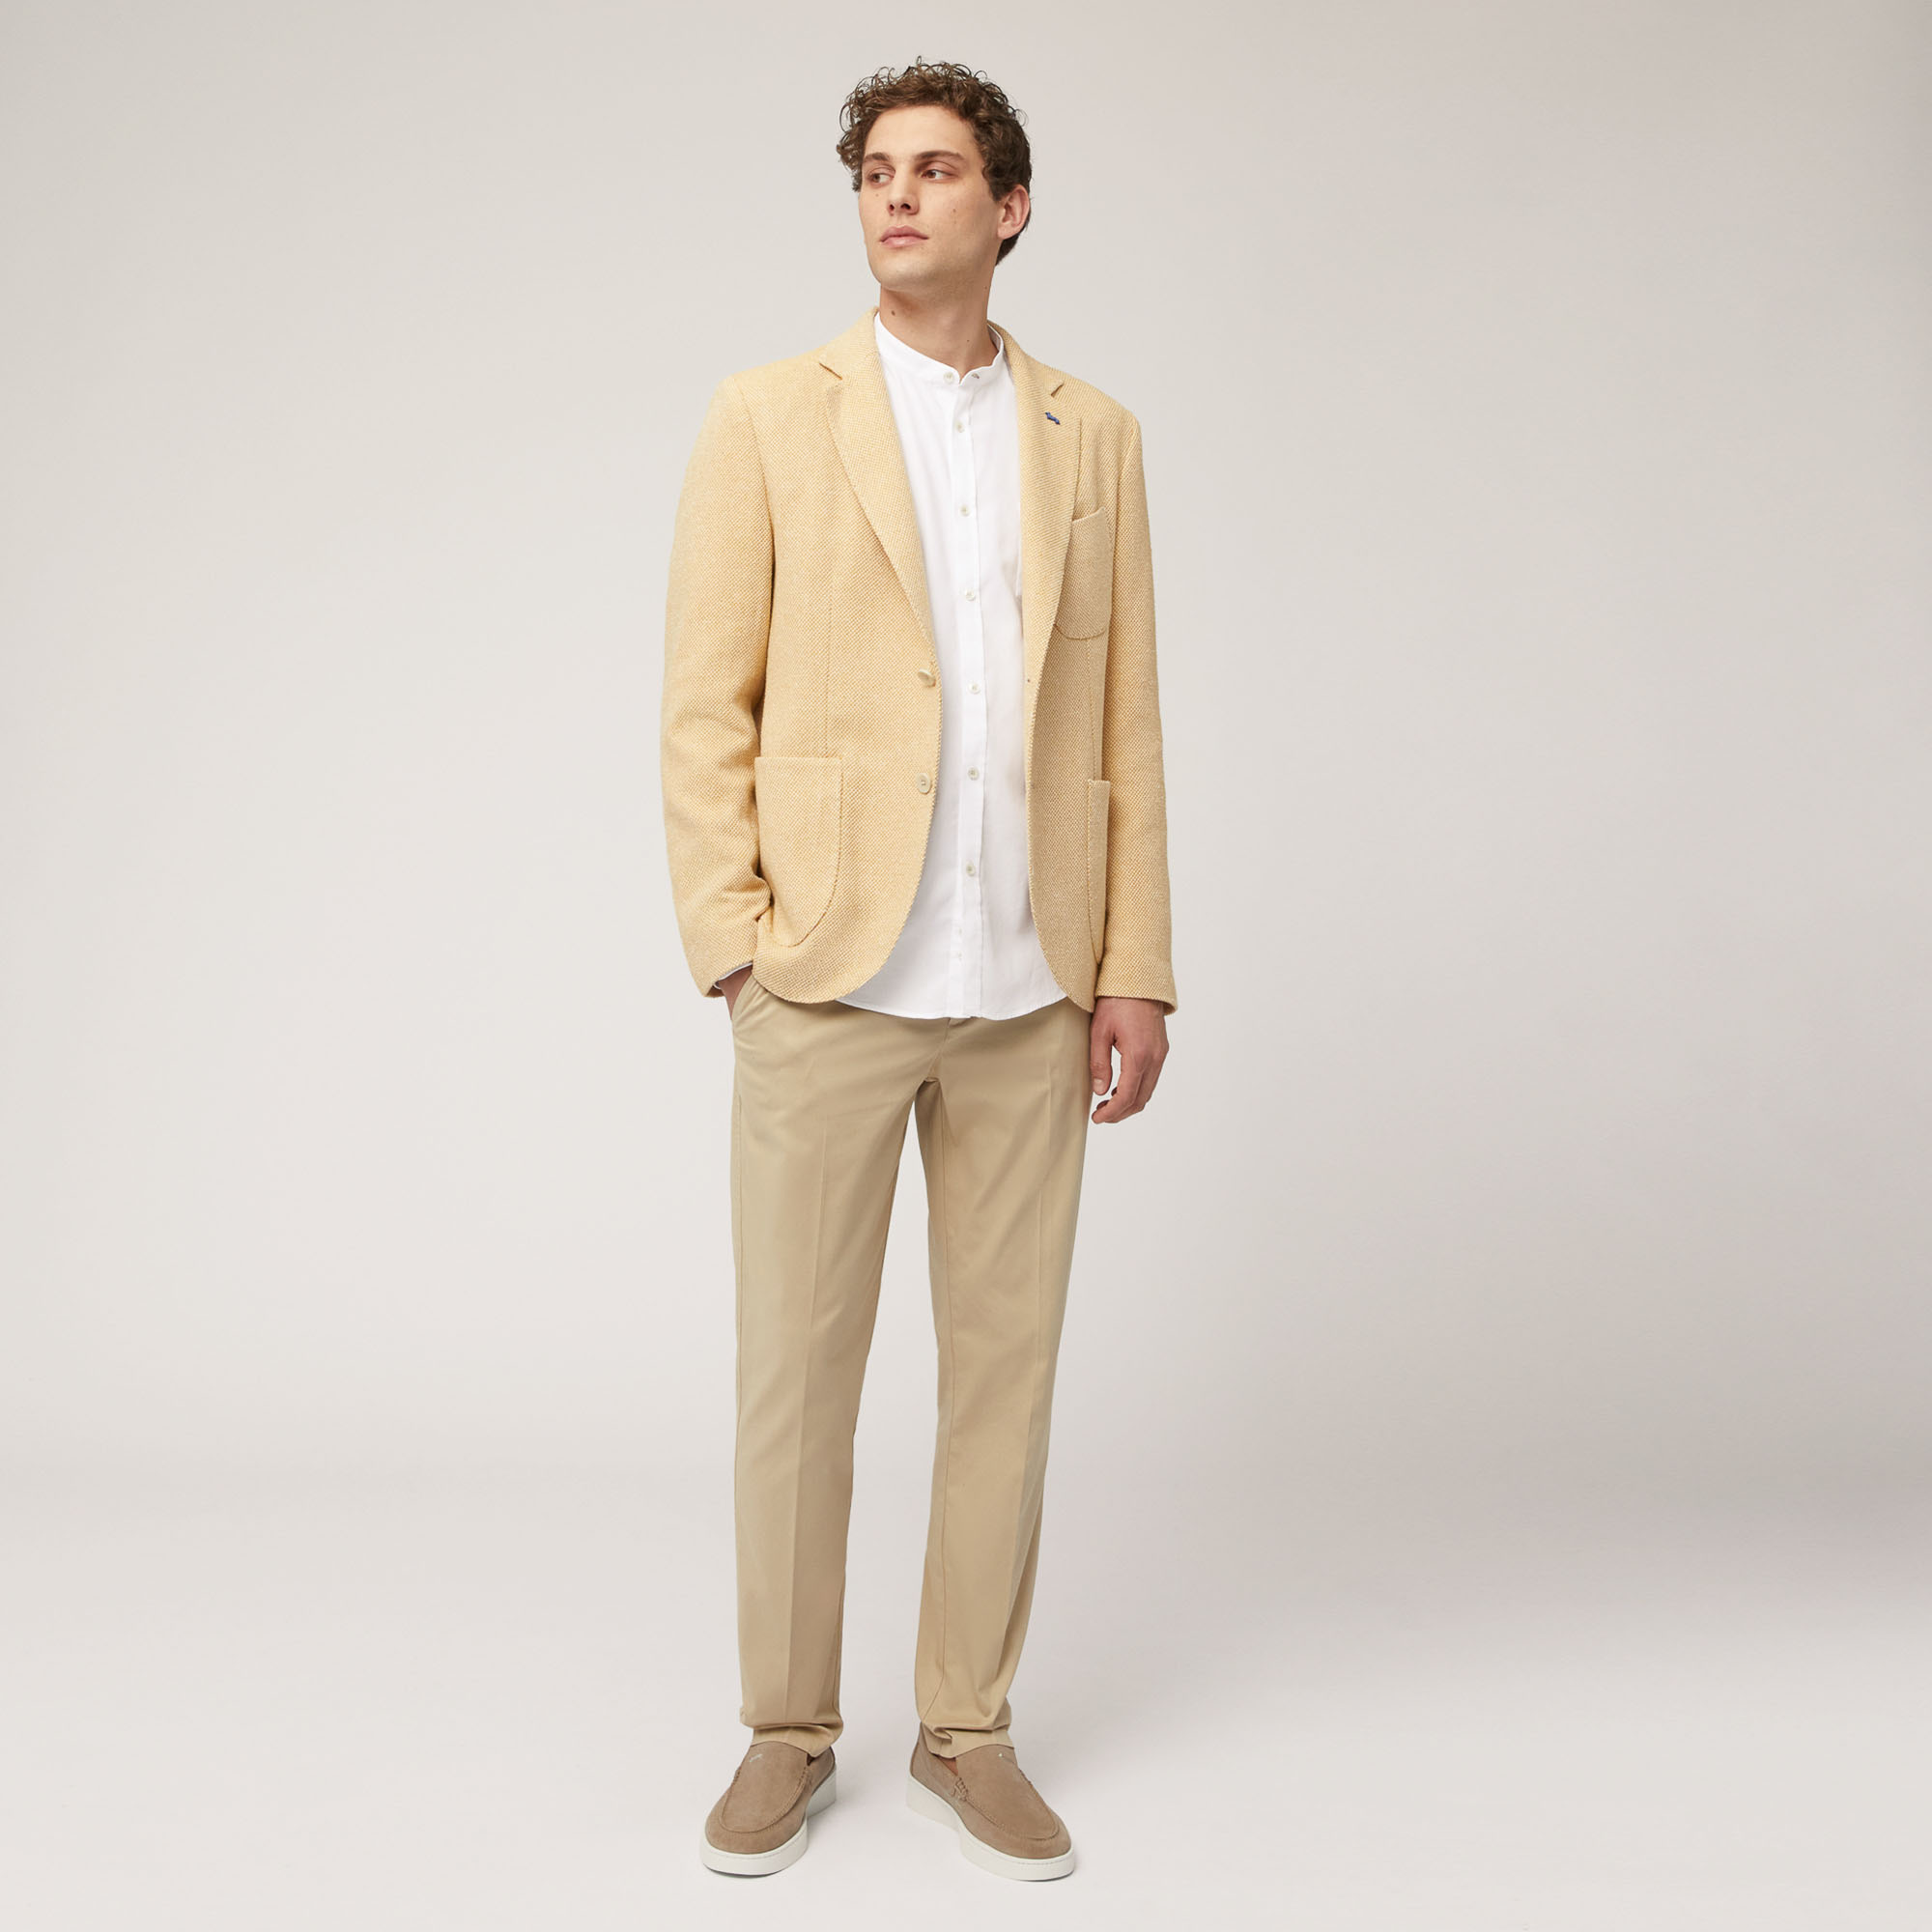 Narrow Fit Chino Pants, Beige, large image number 3